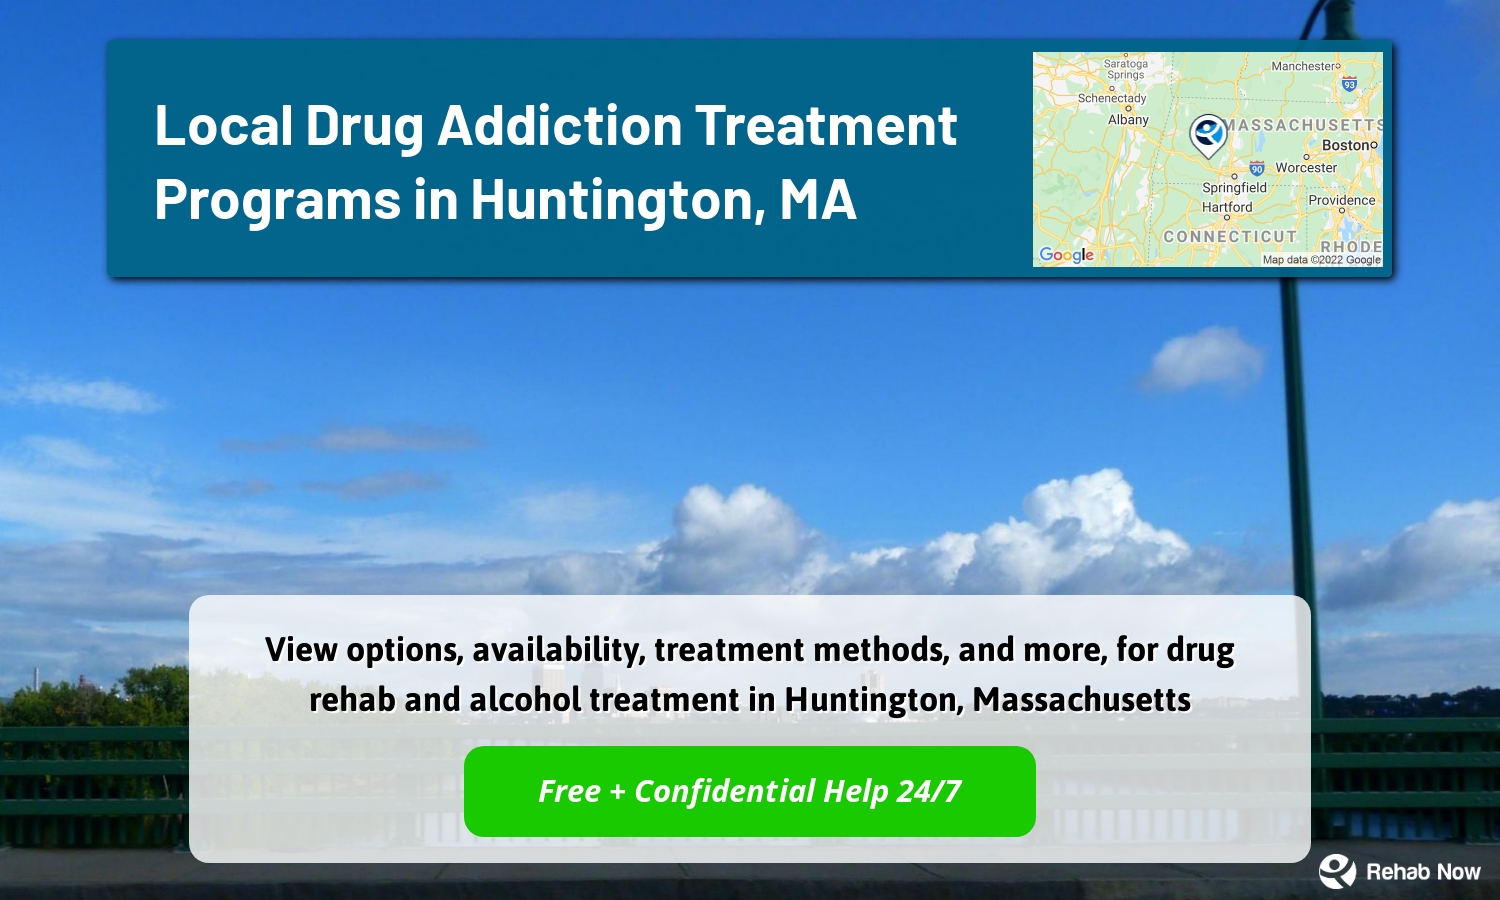 View options, availability, treatment methods, and more, for drug rehab and alcohol treatment in Huntington, Massachusetts